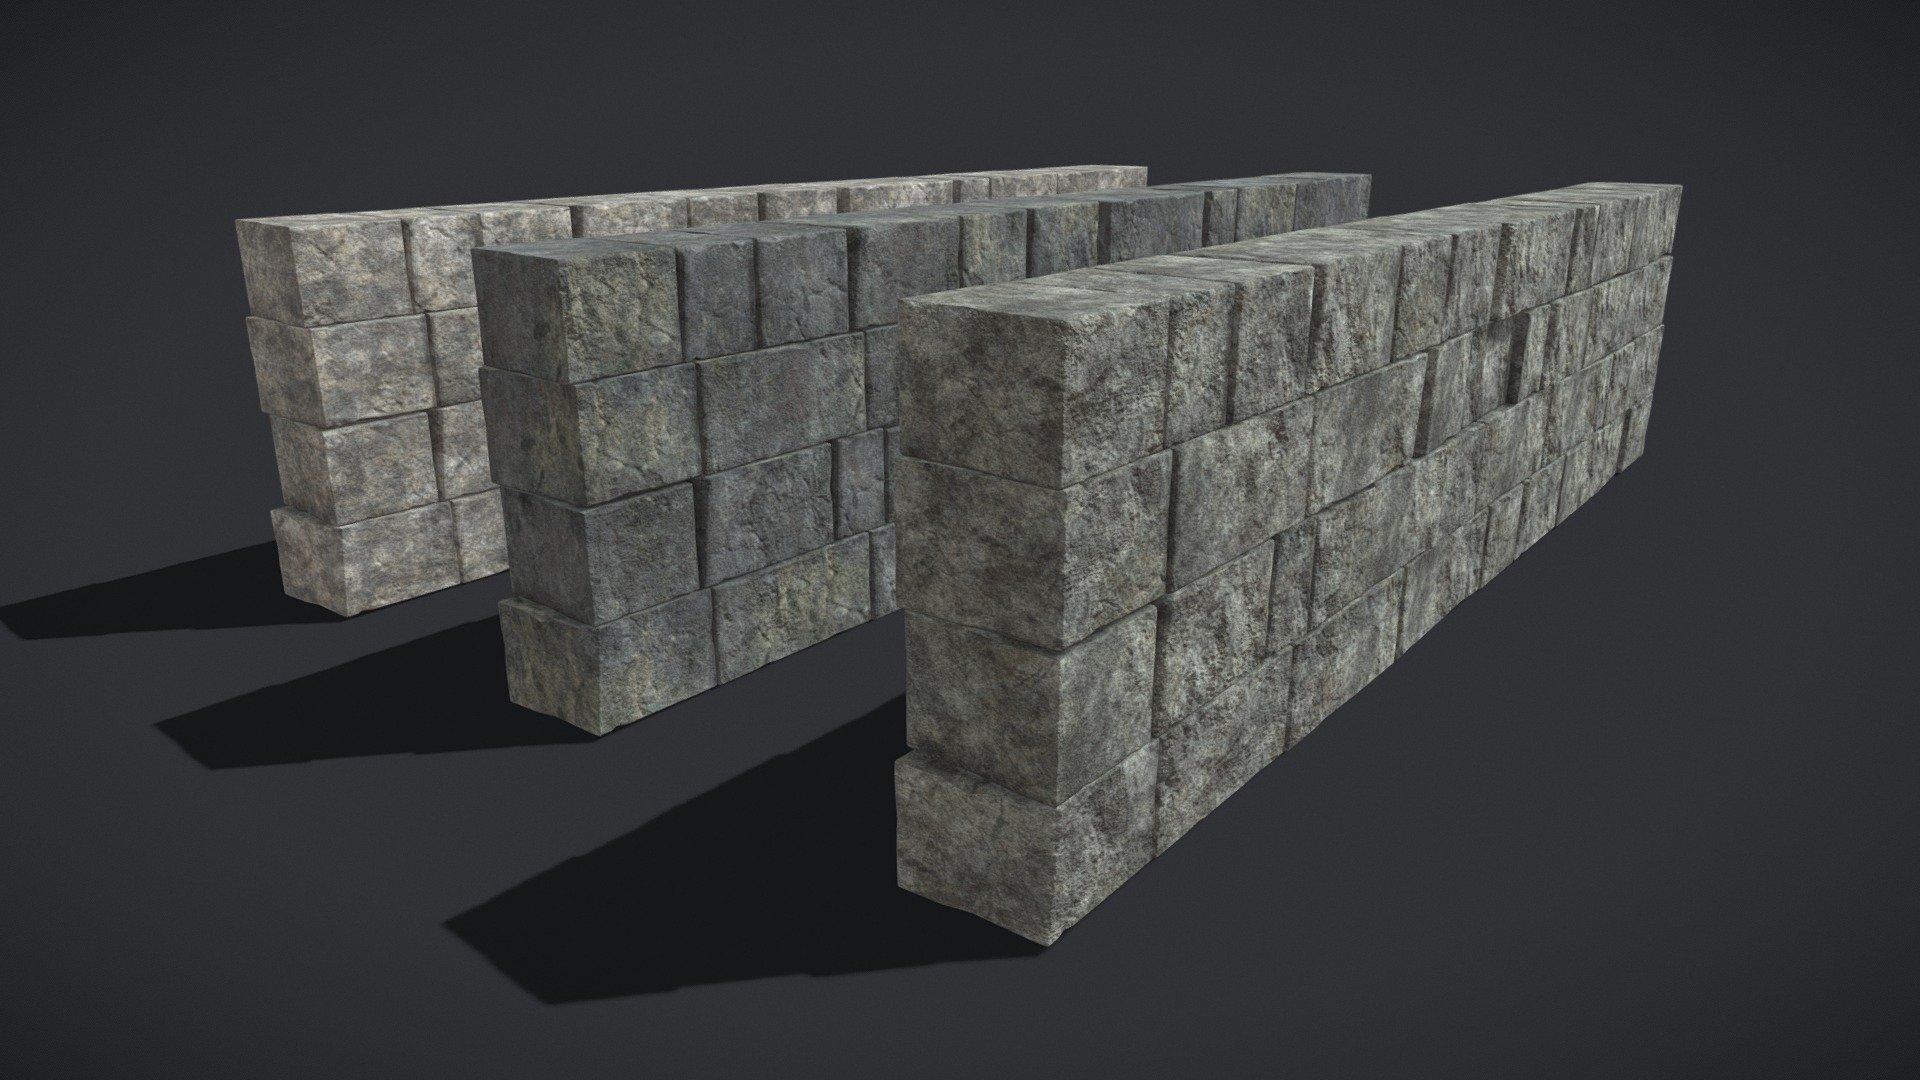 Medieval Cut Brick Wall
VR / AR / Low-poly
PBRapproved
GeometryPolygon mesh
Polygons42,855
Vertices31,296
Textures - Medieval Cut Brick Wall - Buy Royalty Free 3D model by GetDeadEntertainment 3d model